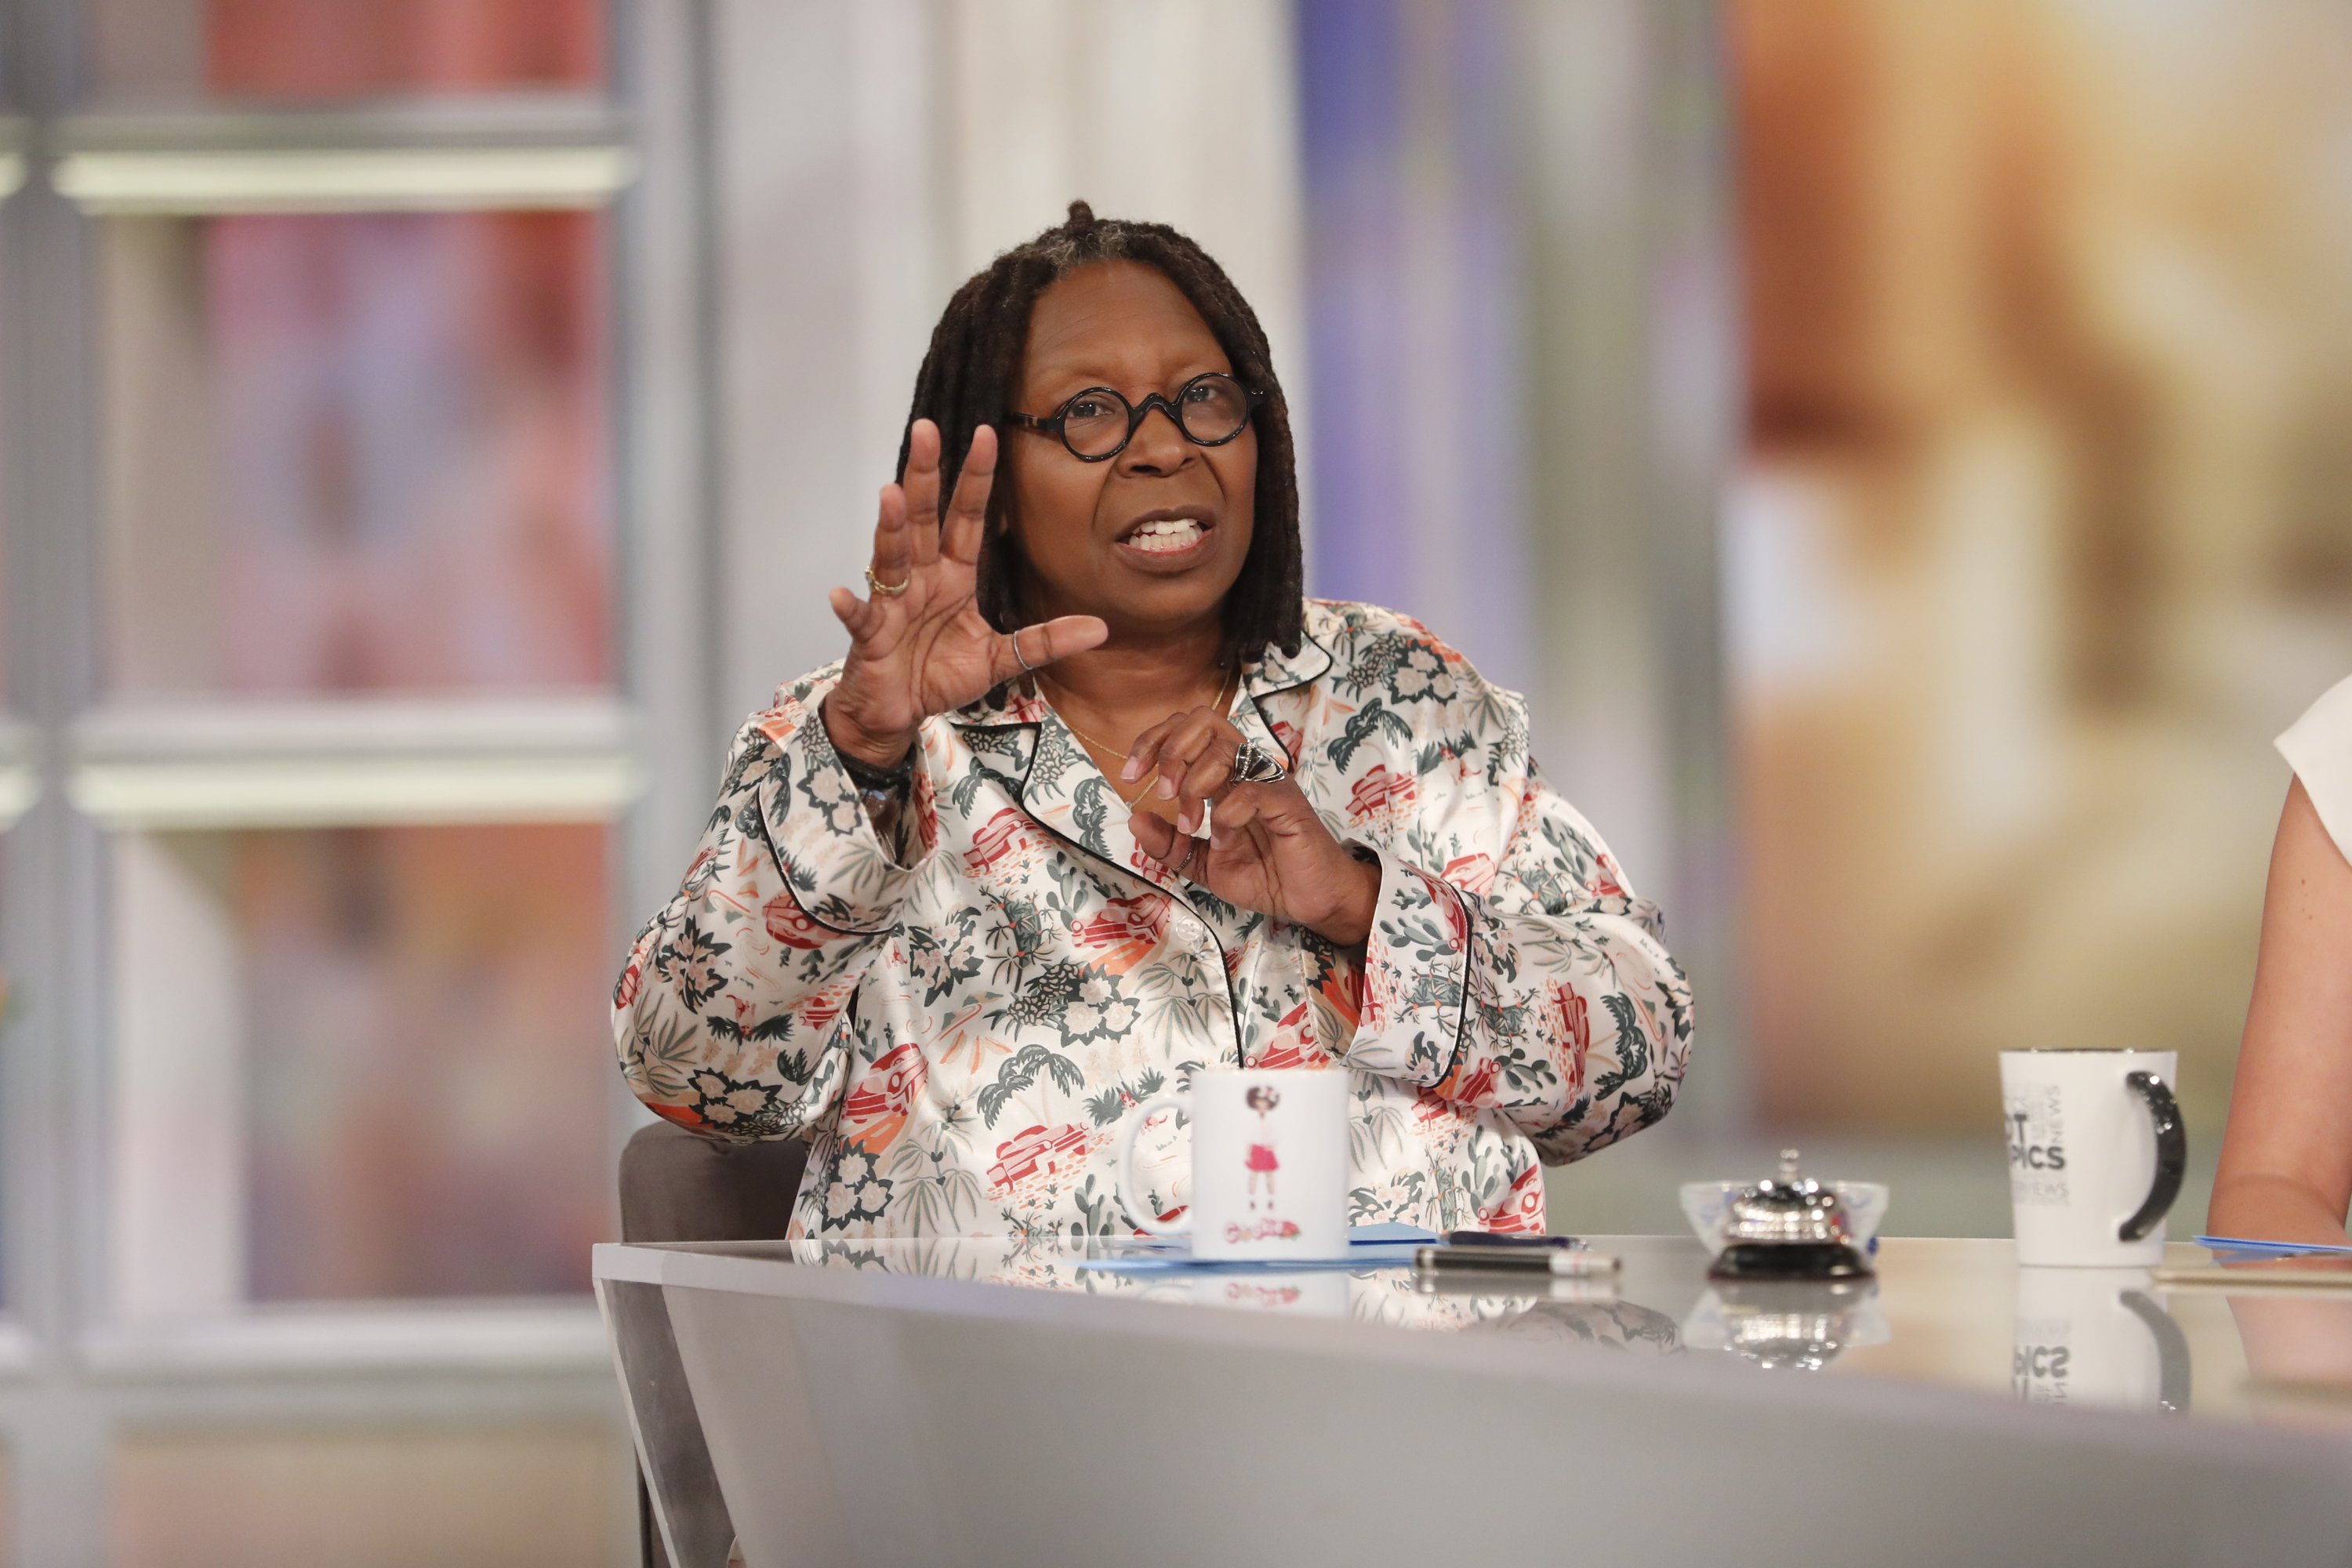 Whoopi Goldberg during Season 21 of the ABC talk show, "The View," on October 17, 2018. | Source: Getty Images